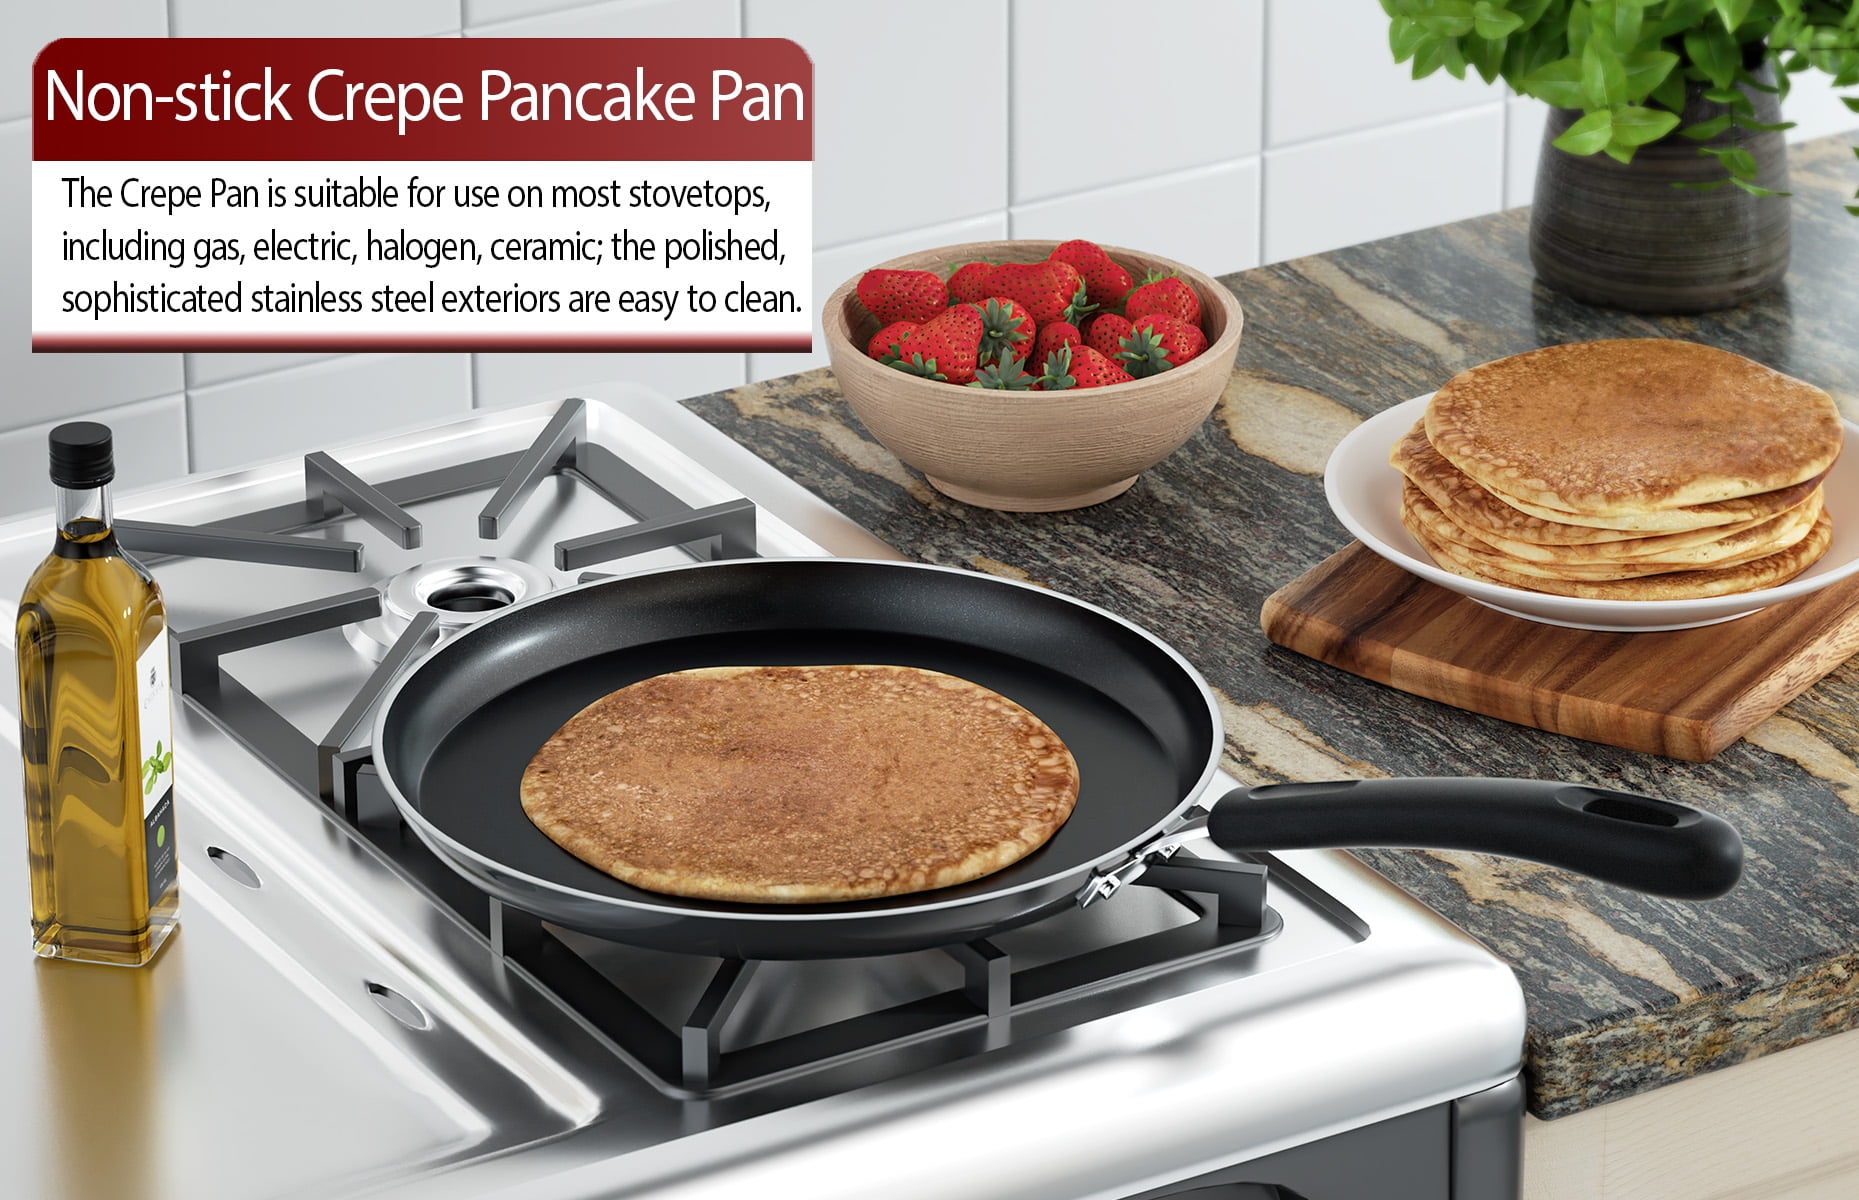 Stovetop Crepe Pan (Cherry Red) with Wooden Crepe Rateau, Item L2036-2767